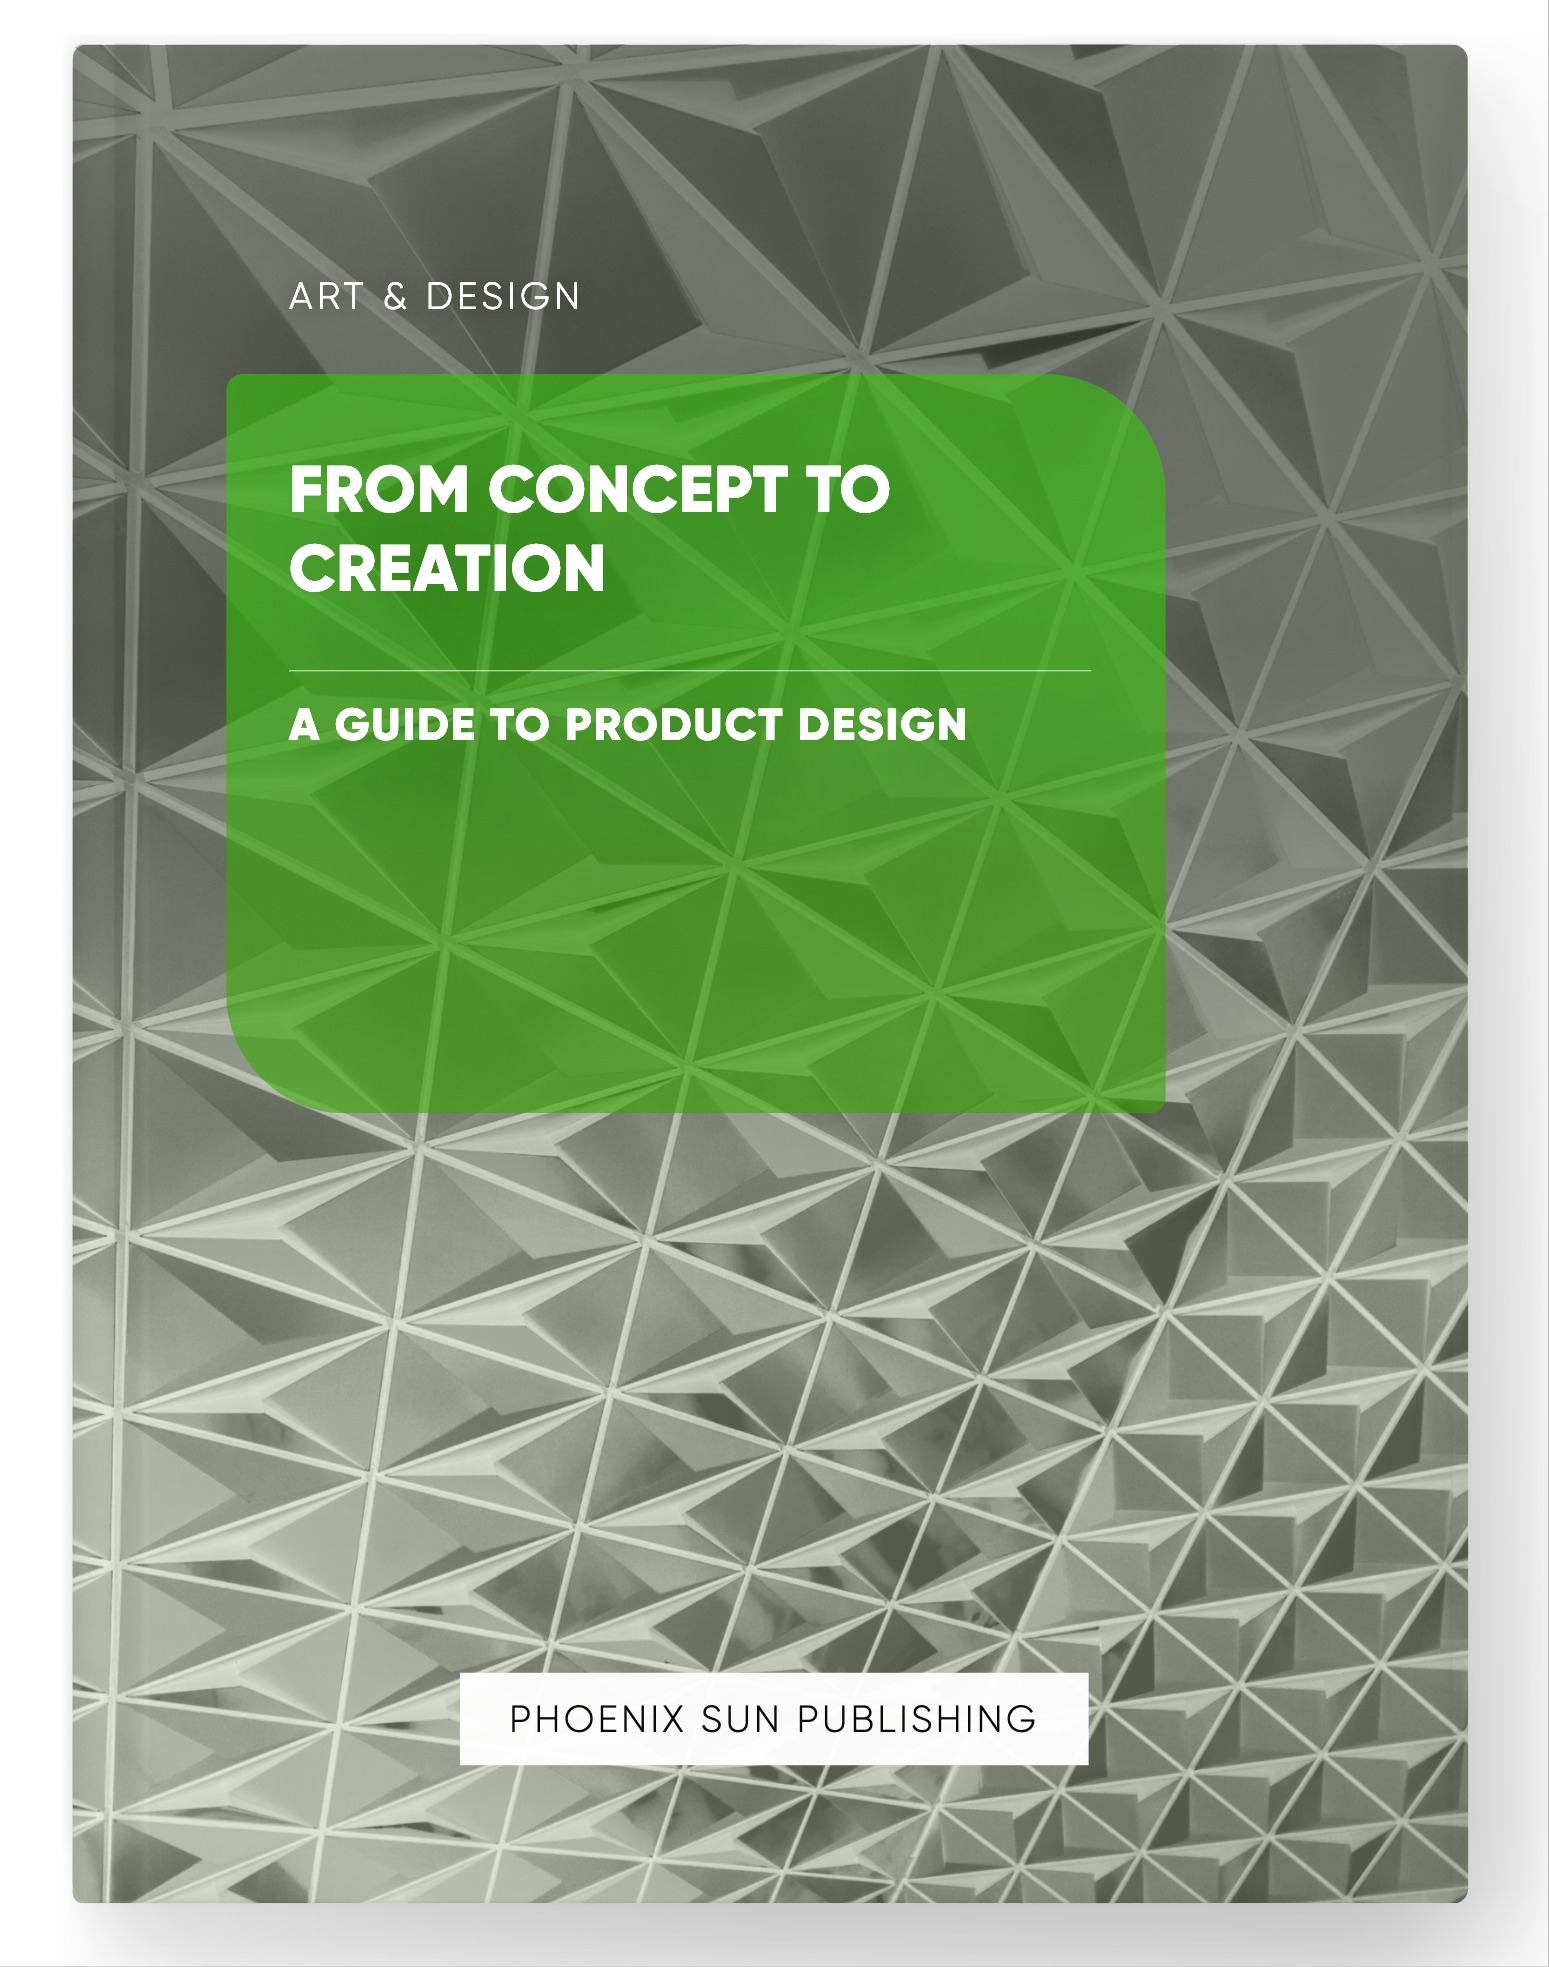 From Concept to Creation – A Guide to Product Design